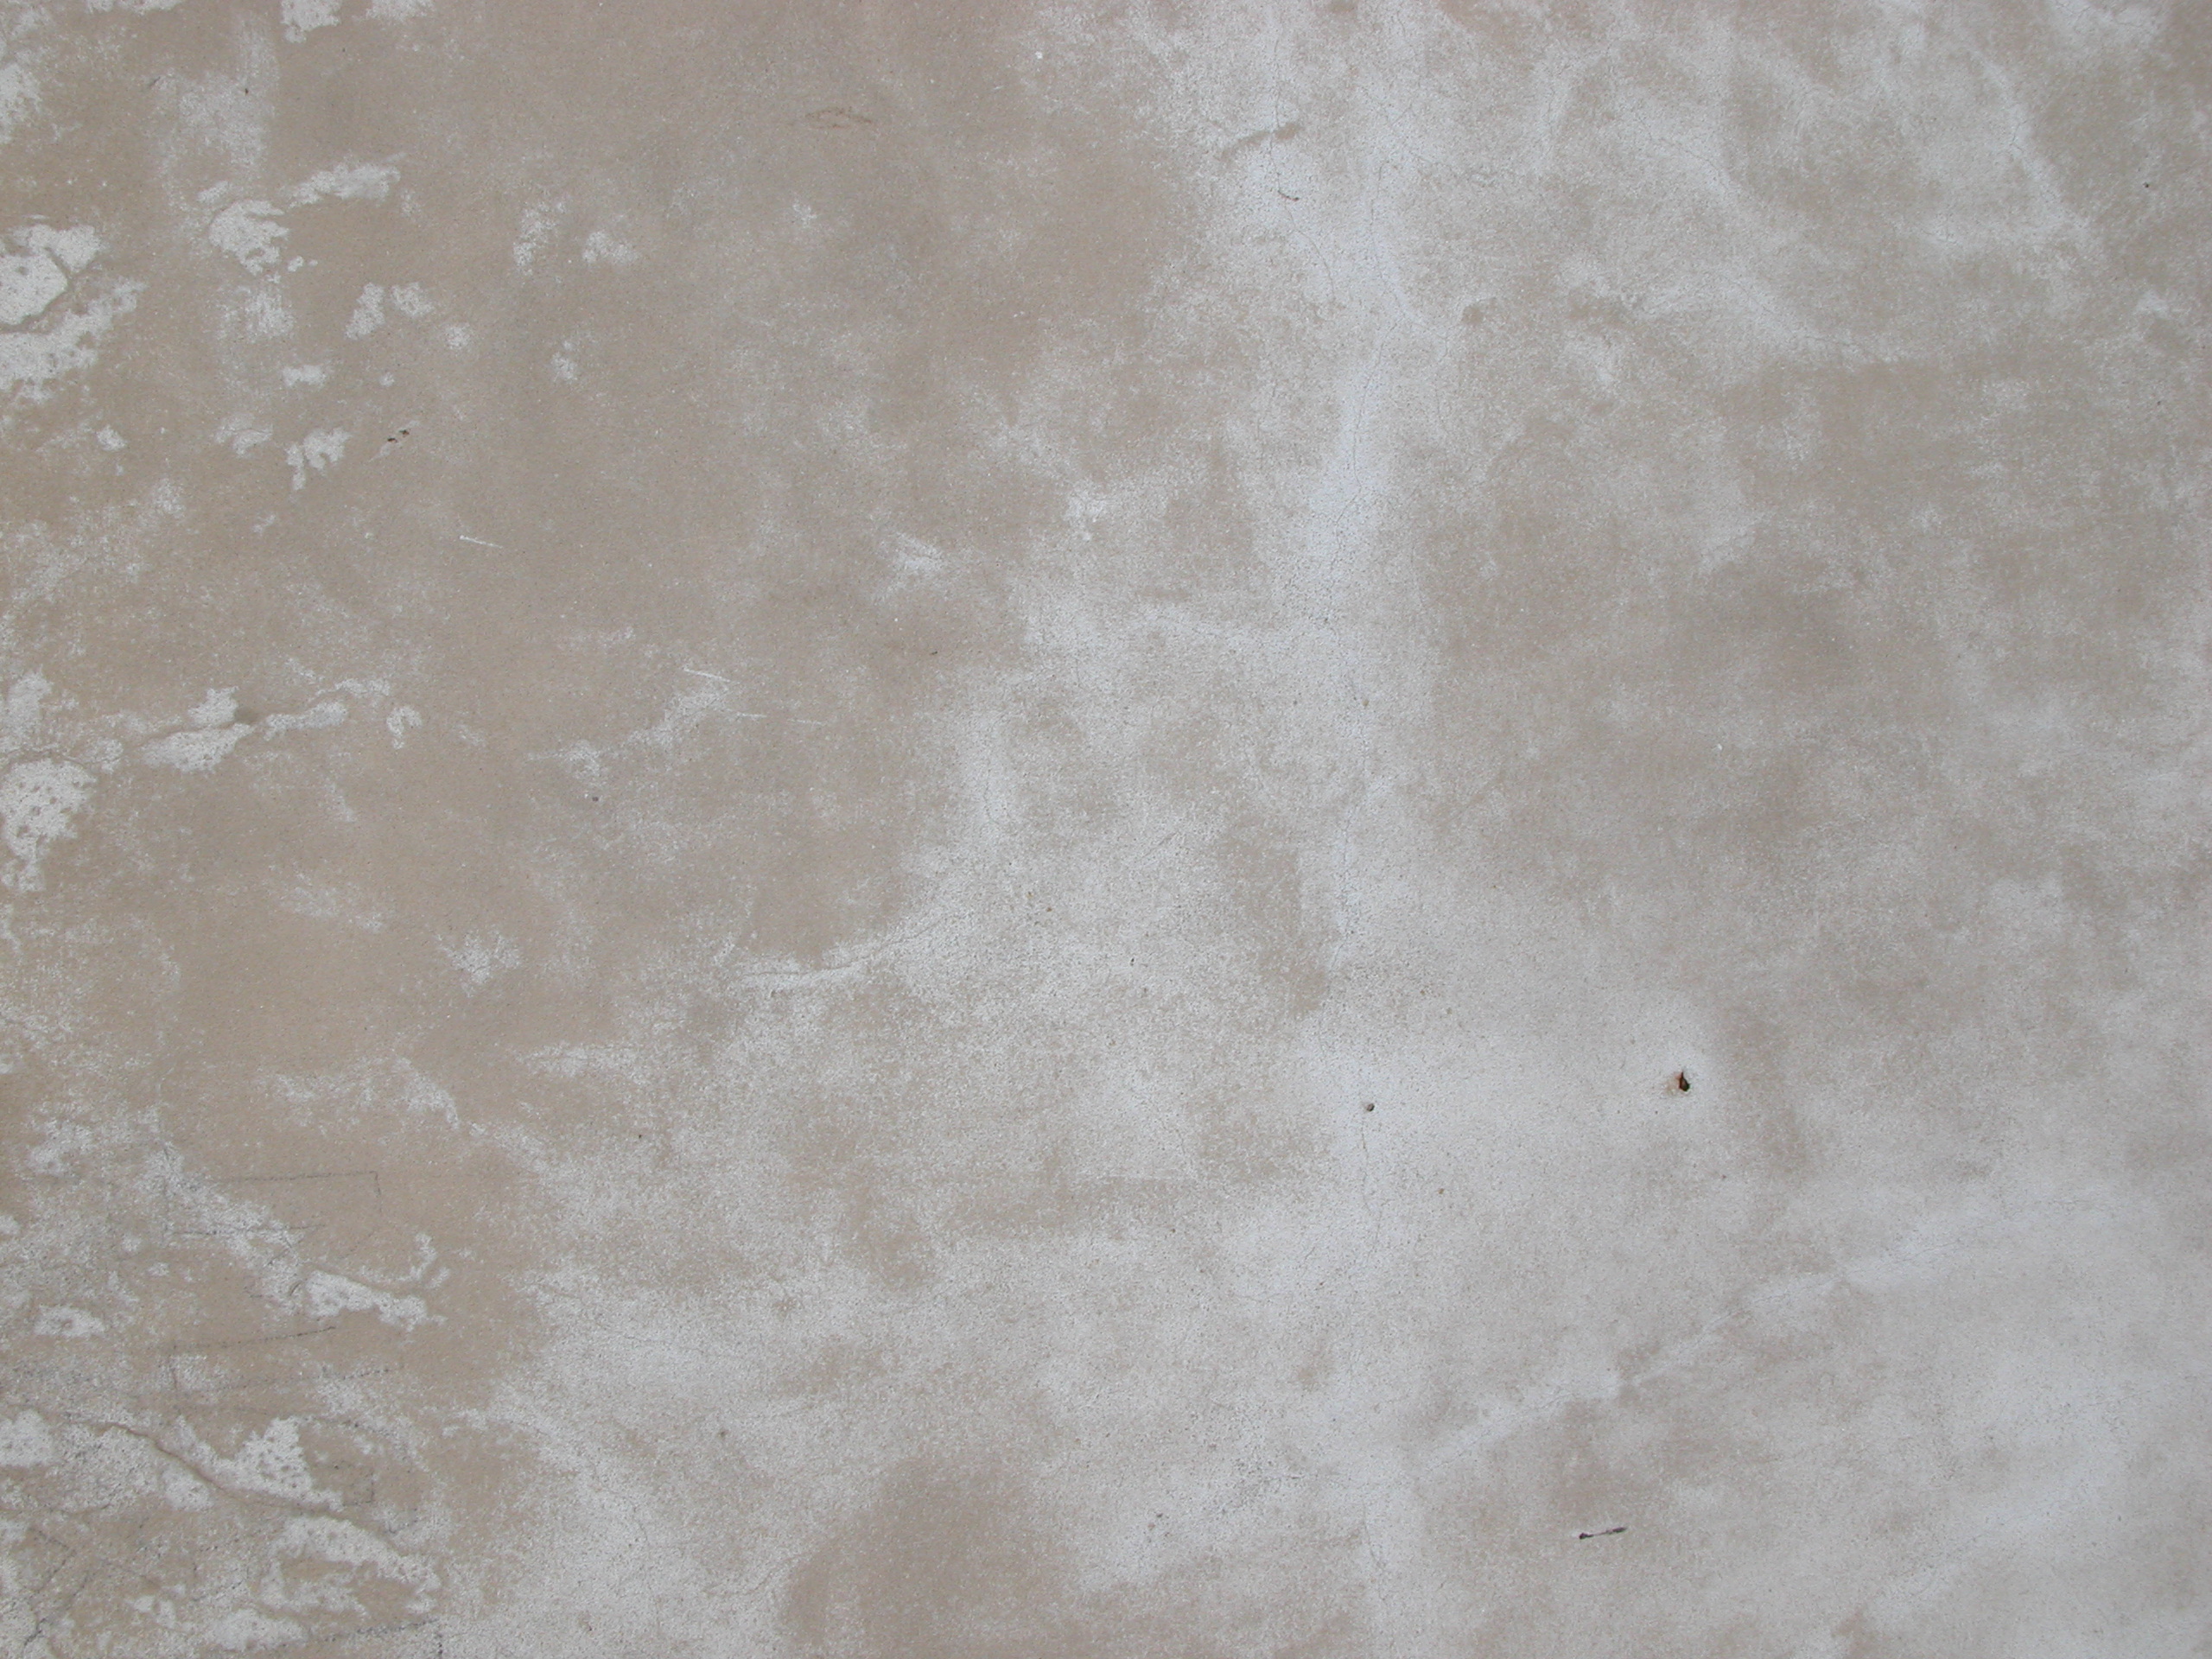 Image*After : photos : wall texture plaster concrete wet